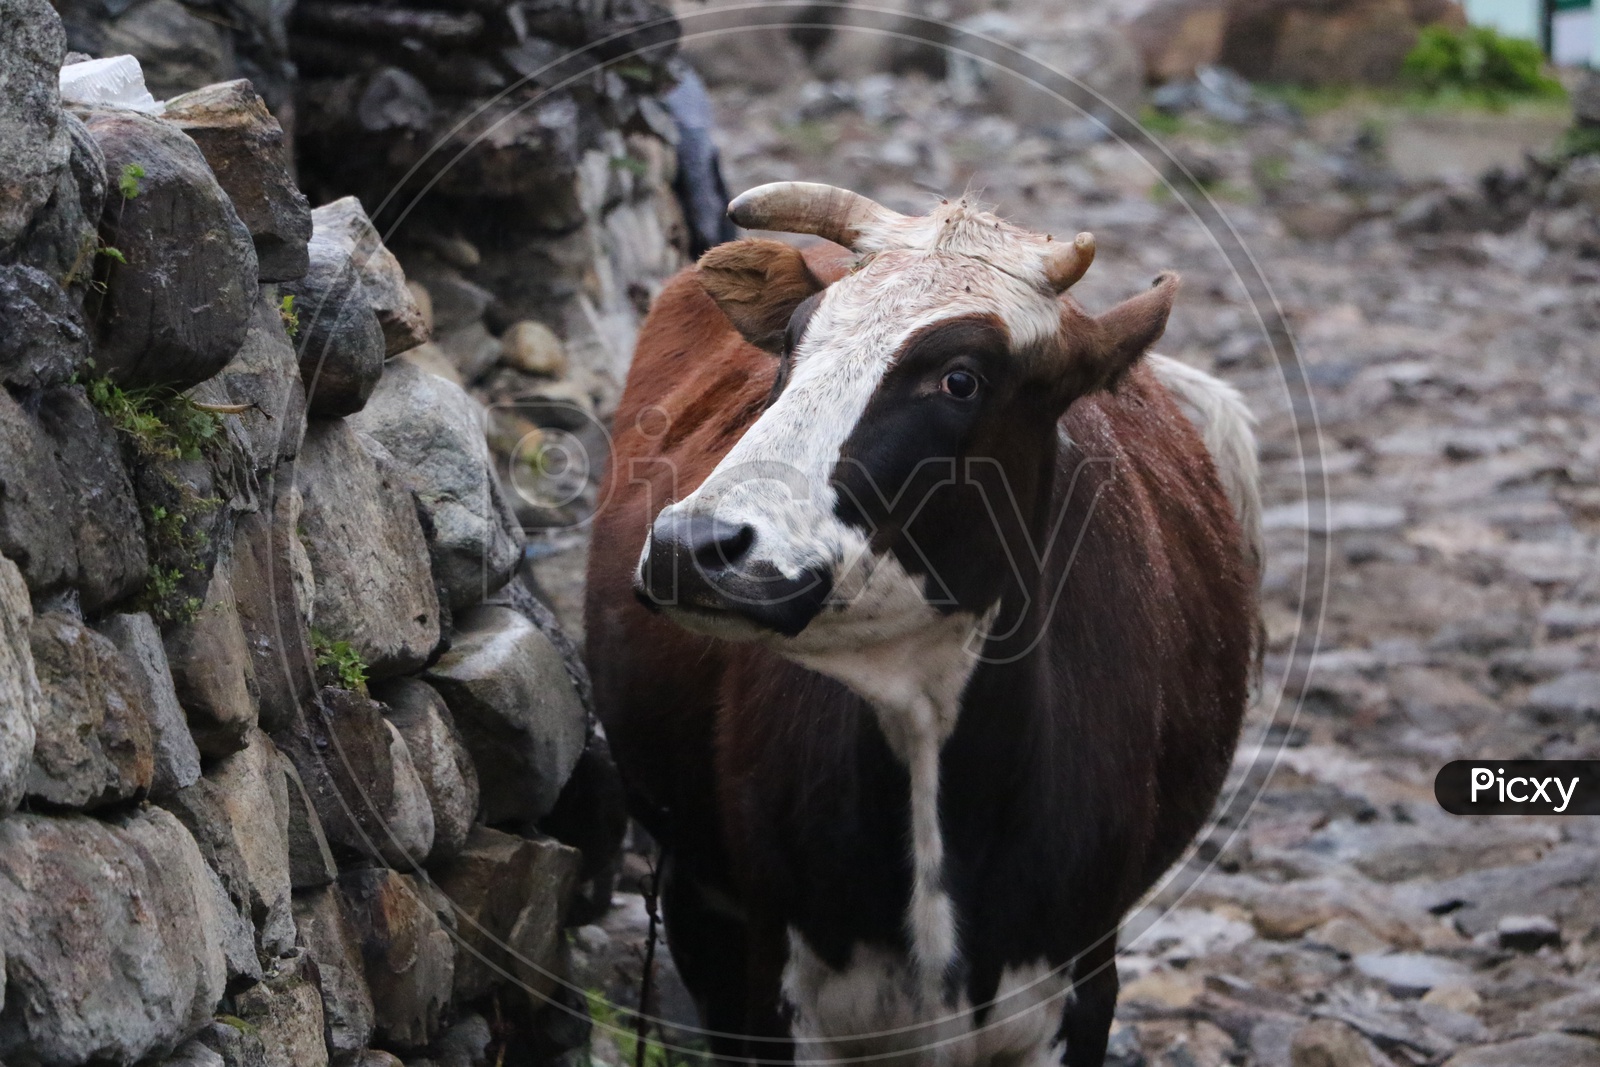 A brown and white coloured cow in Sikkim